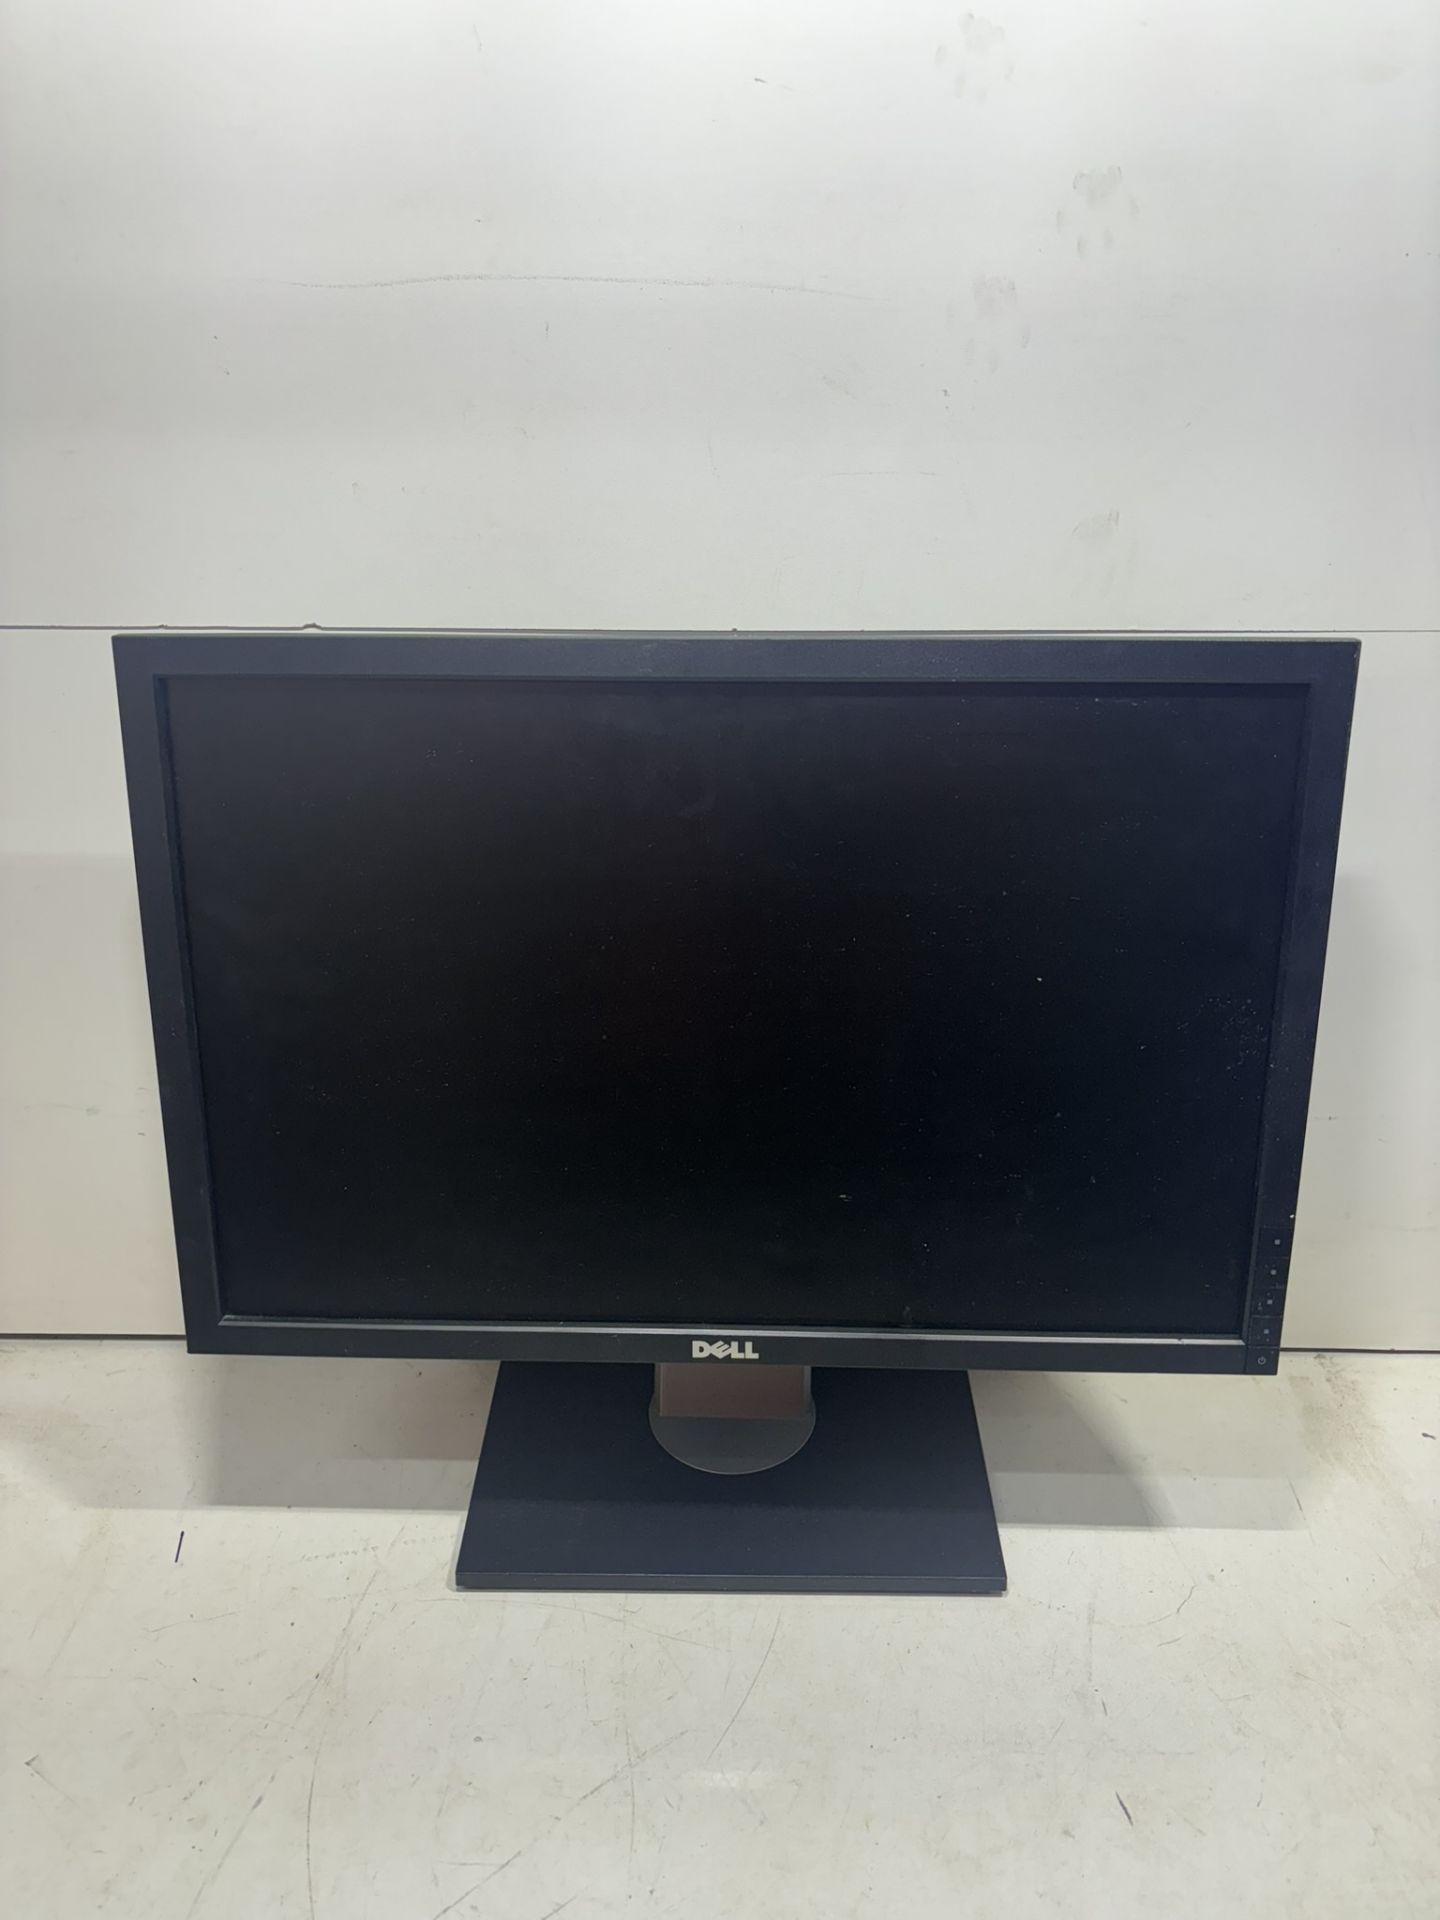 2 x Dell P2210f 22? Widescreen Height Adjustable Monitors - Image 6 of 7